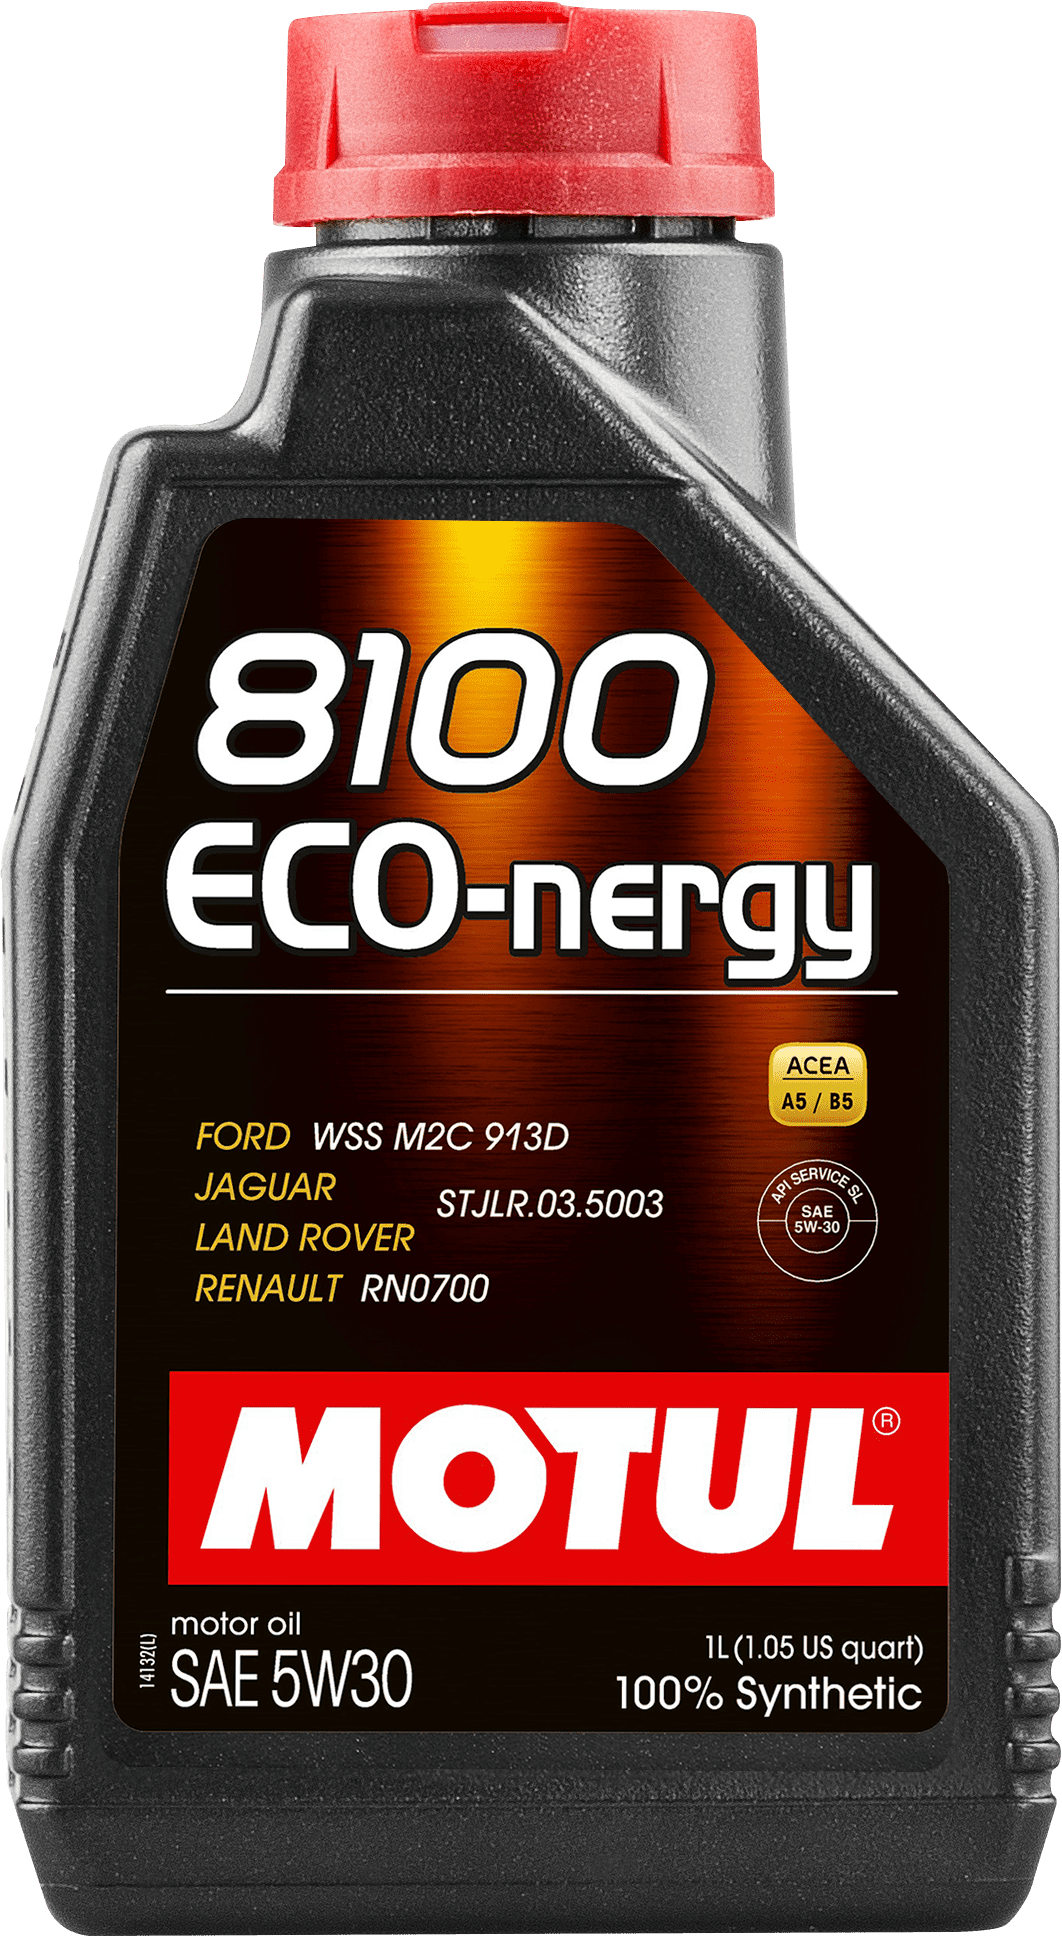 102782-1 Fuel Economy Engine Oil, 100% Synthetic, specially designed for recent engines, powered by Gasoline or diésel engines, turbocharged or naturally aspirated, indirect or direct injection, requiring use of a “Fuel Economy” low friction and low HTHS (High Temperature High Shear) viscosity oil.